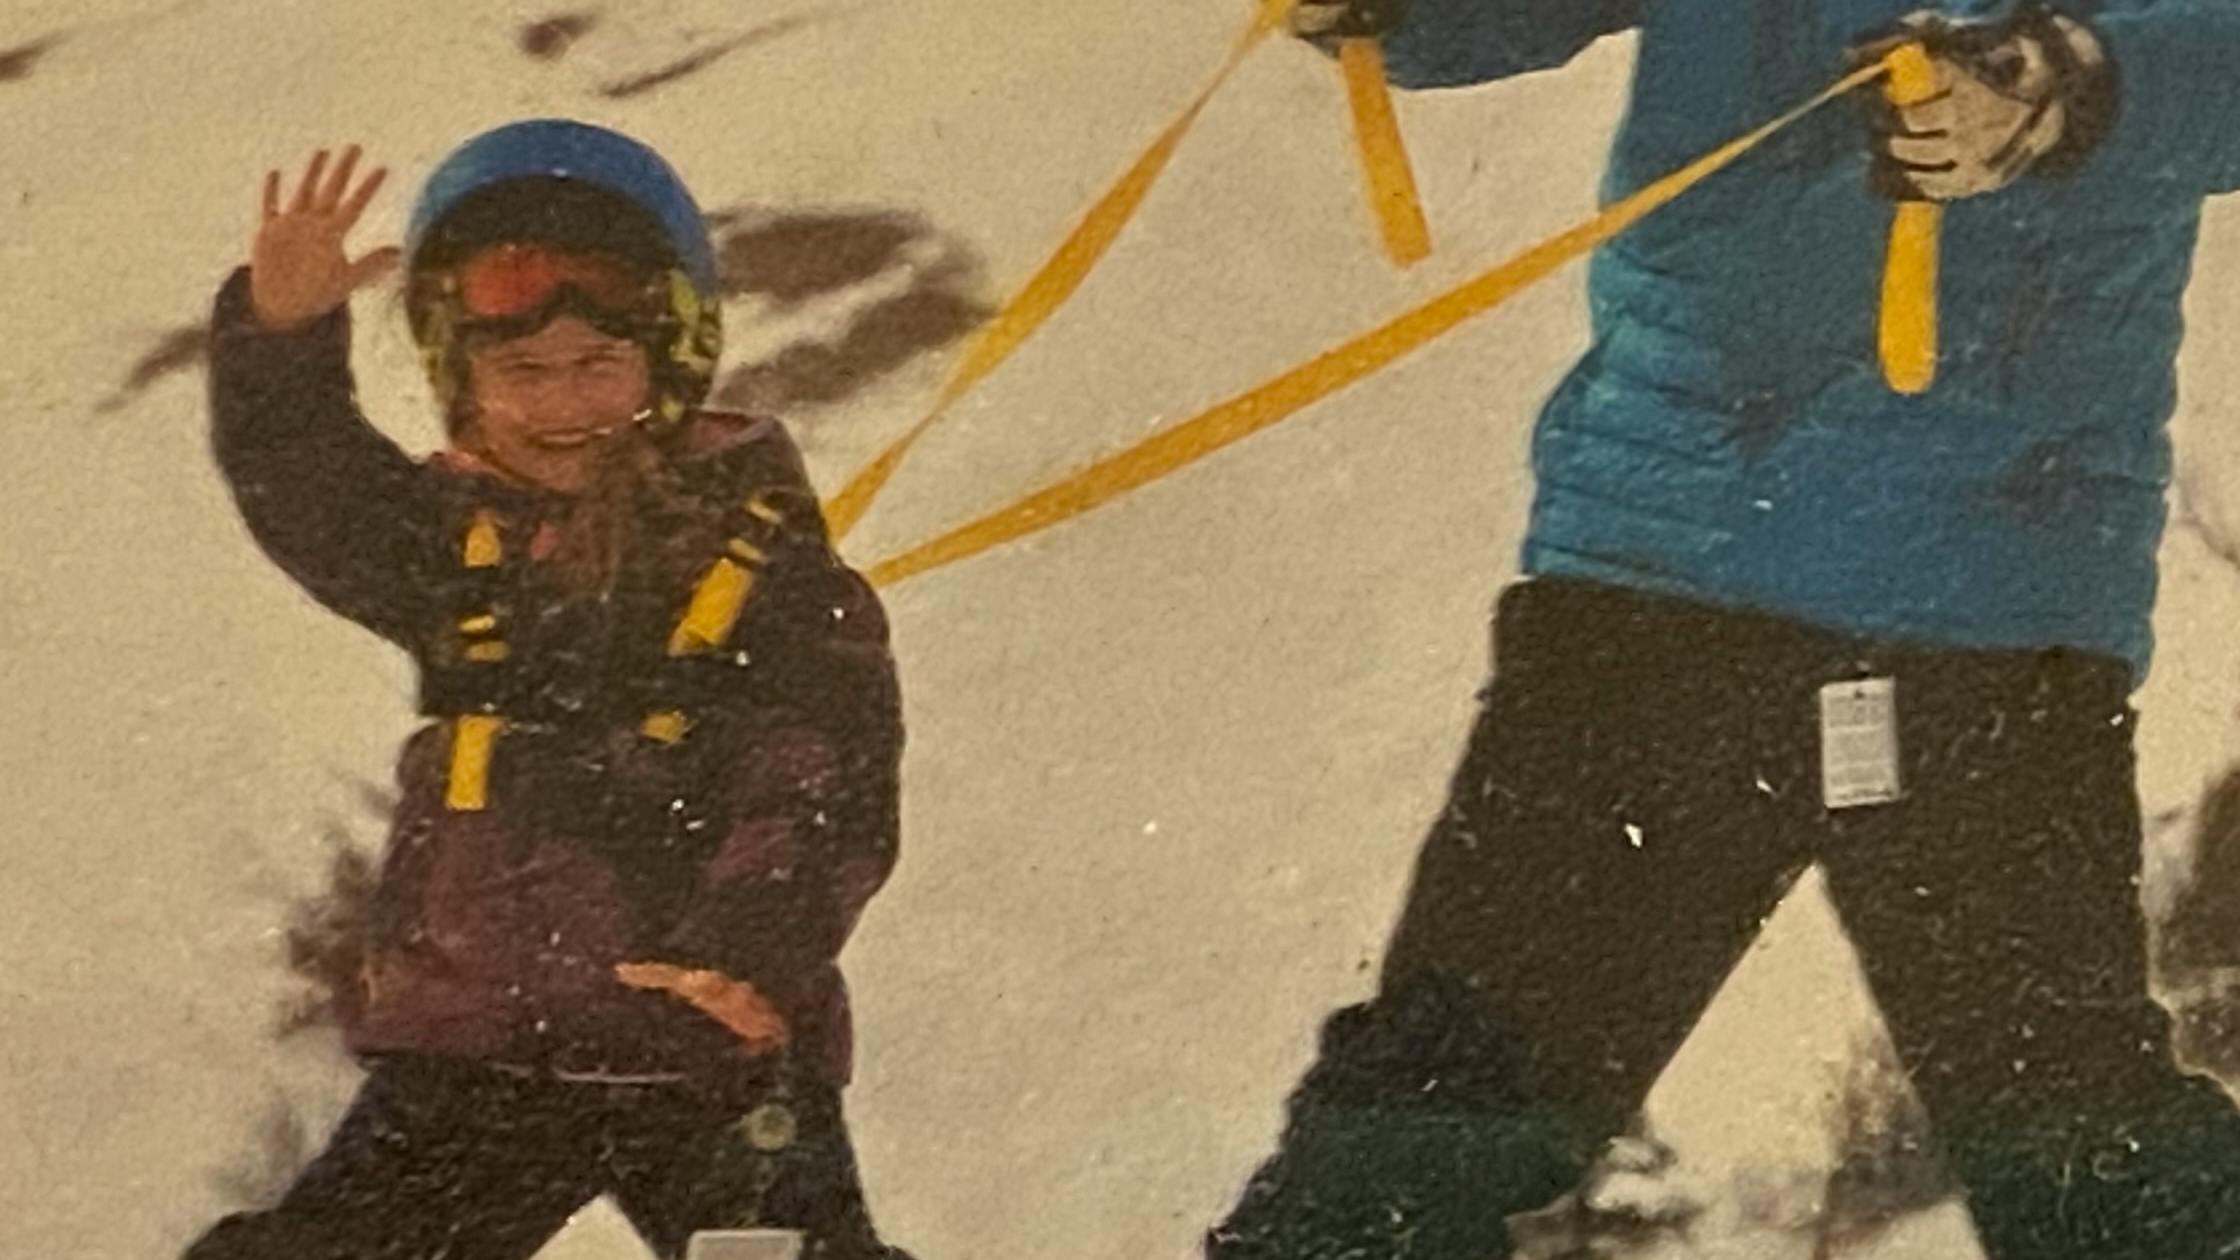 An old photo of Abe on a ski harness held by his dad